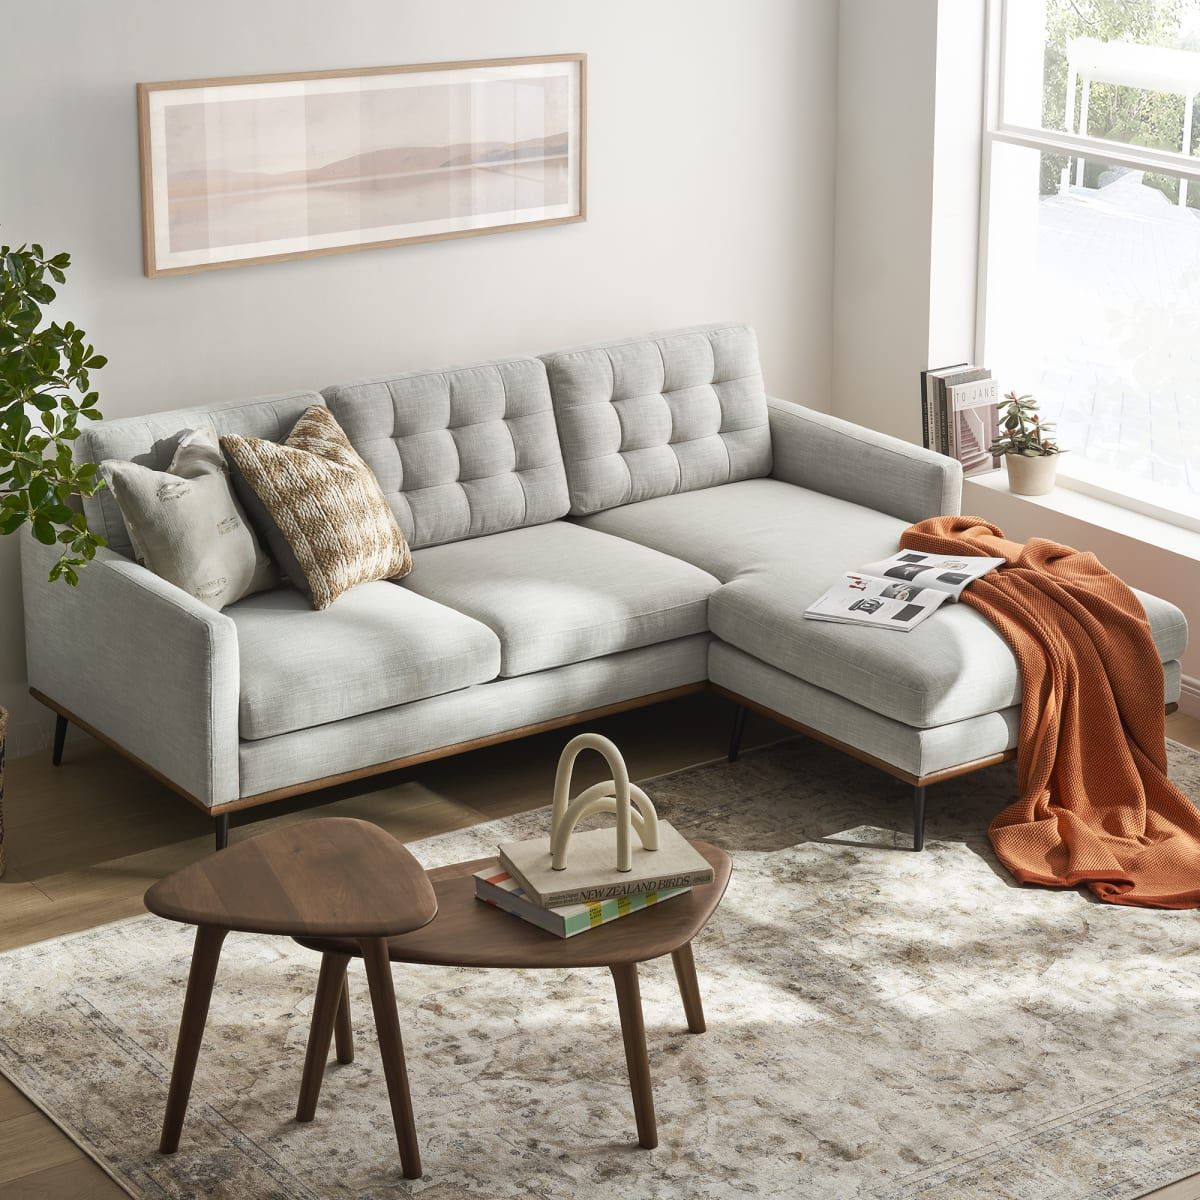 Isaac Reversible Sectional Sofa | Castlery United States With Regard To Reversible Sectional Sofas (View 17 of 20)